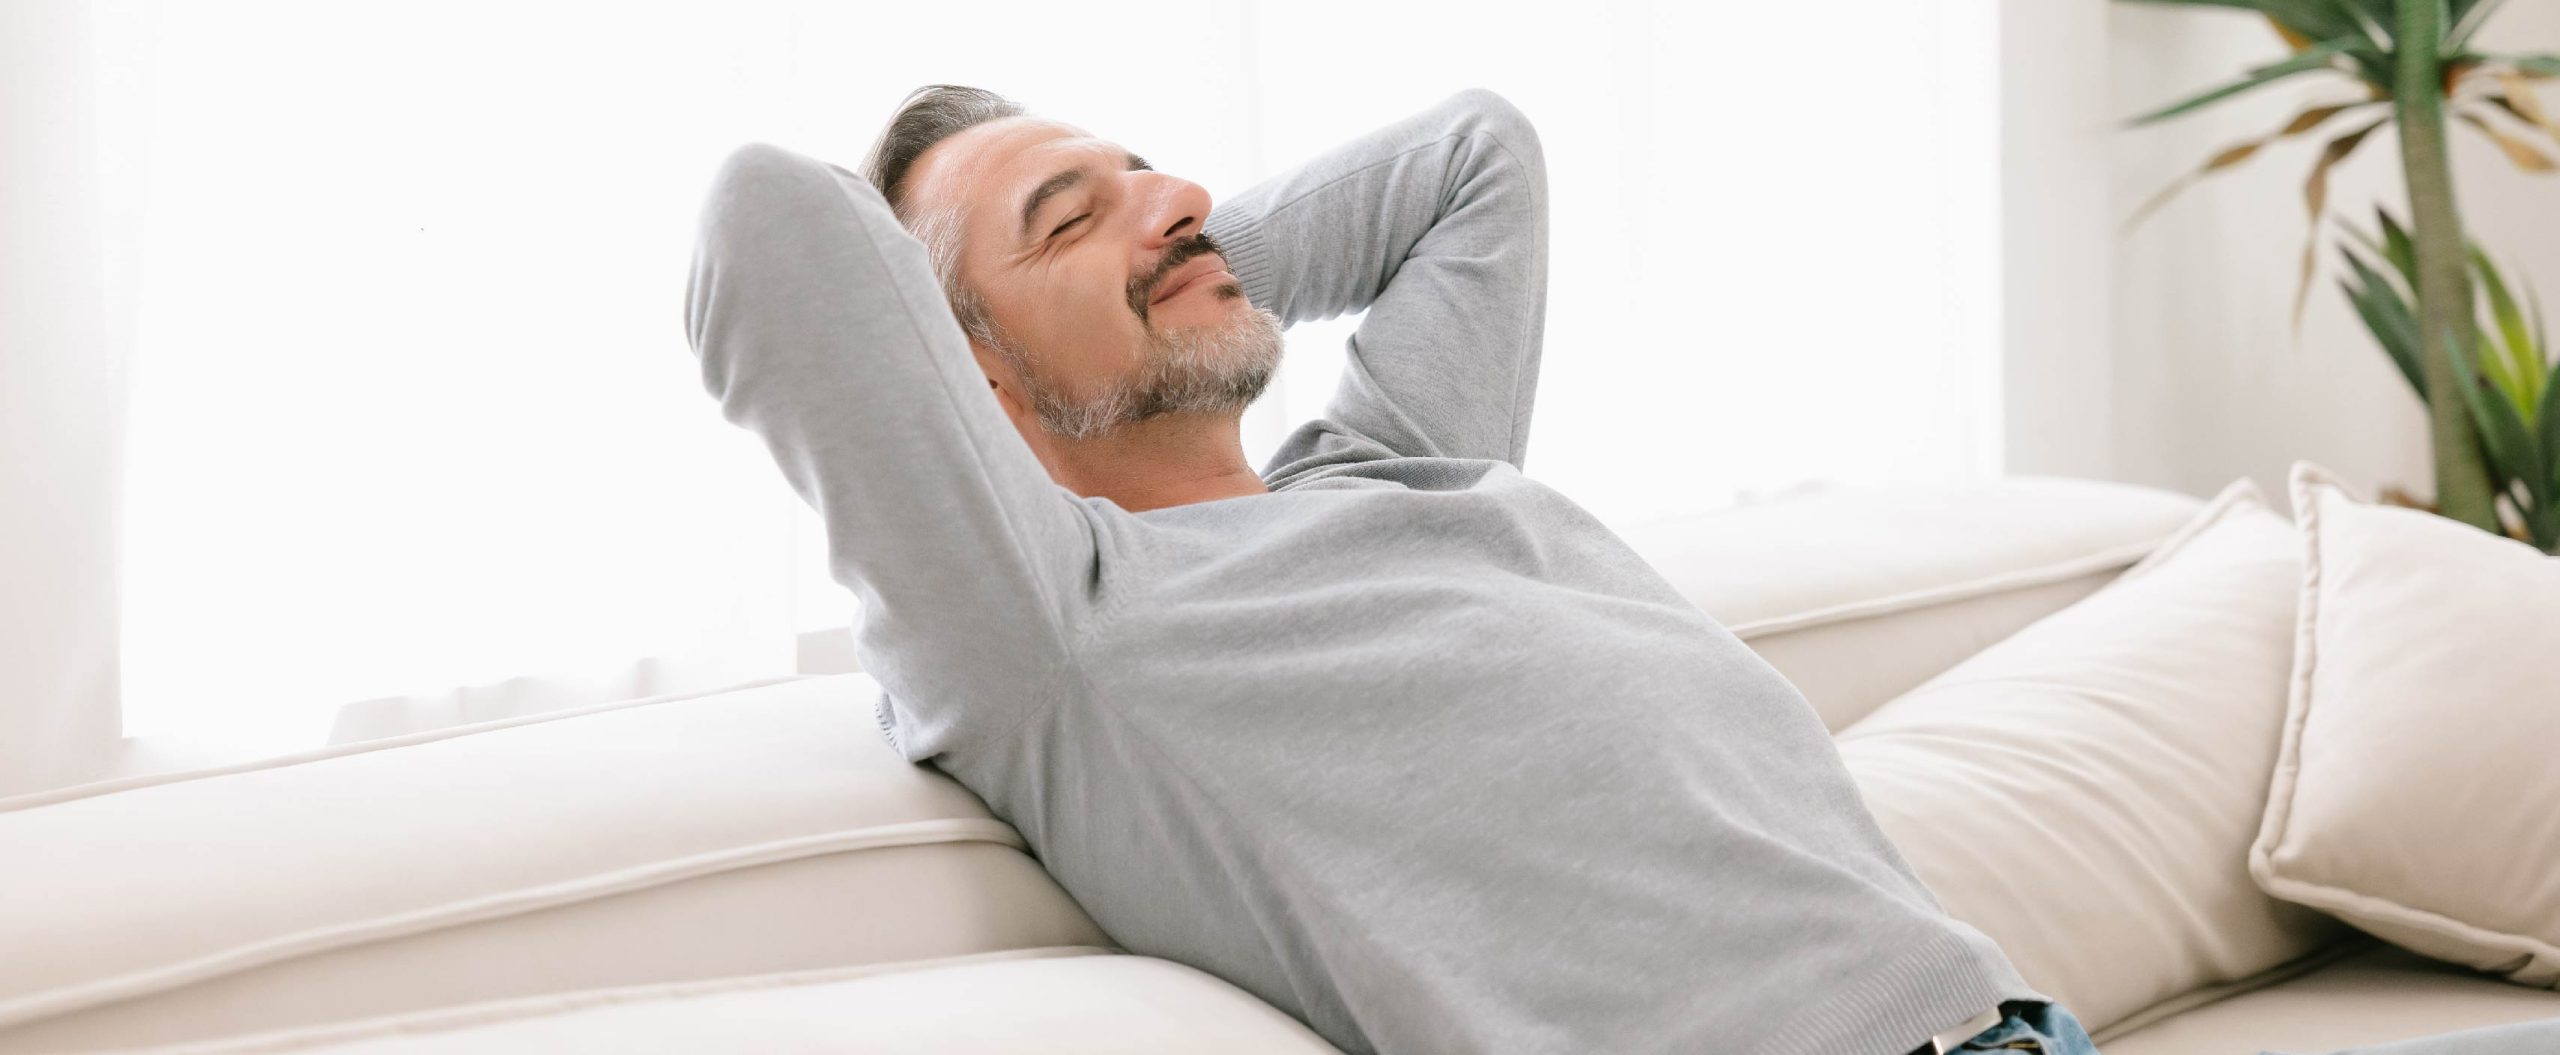 man sitting on sofa relaxing in home comfort